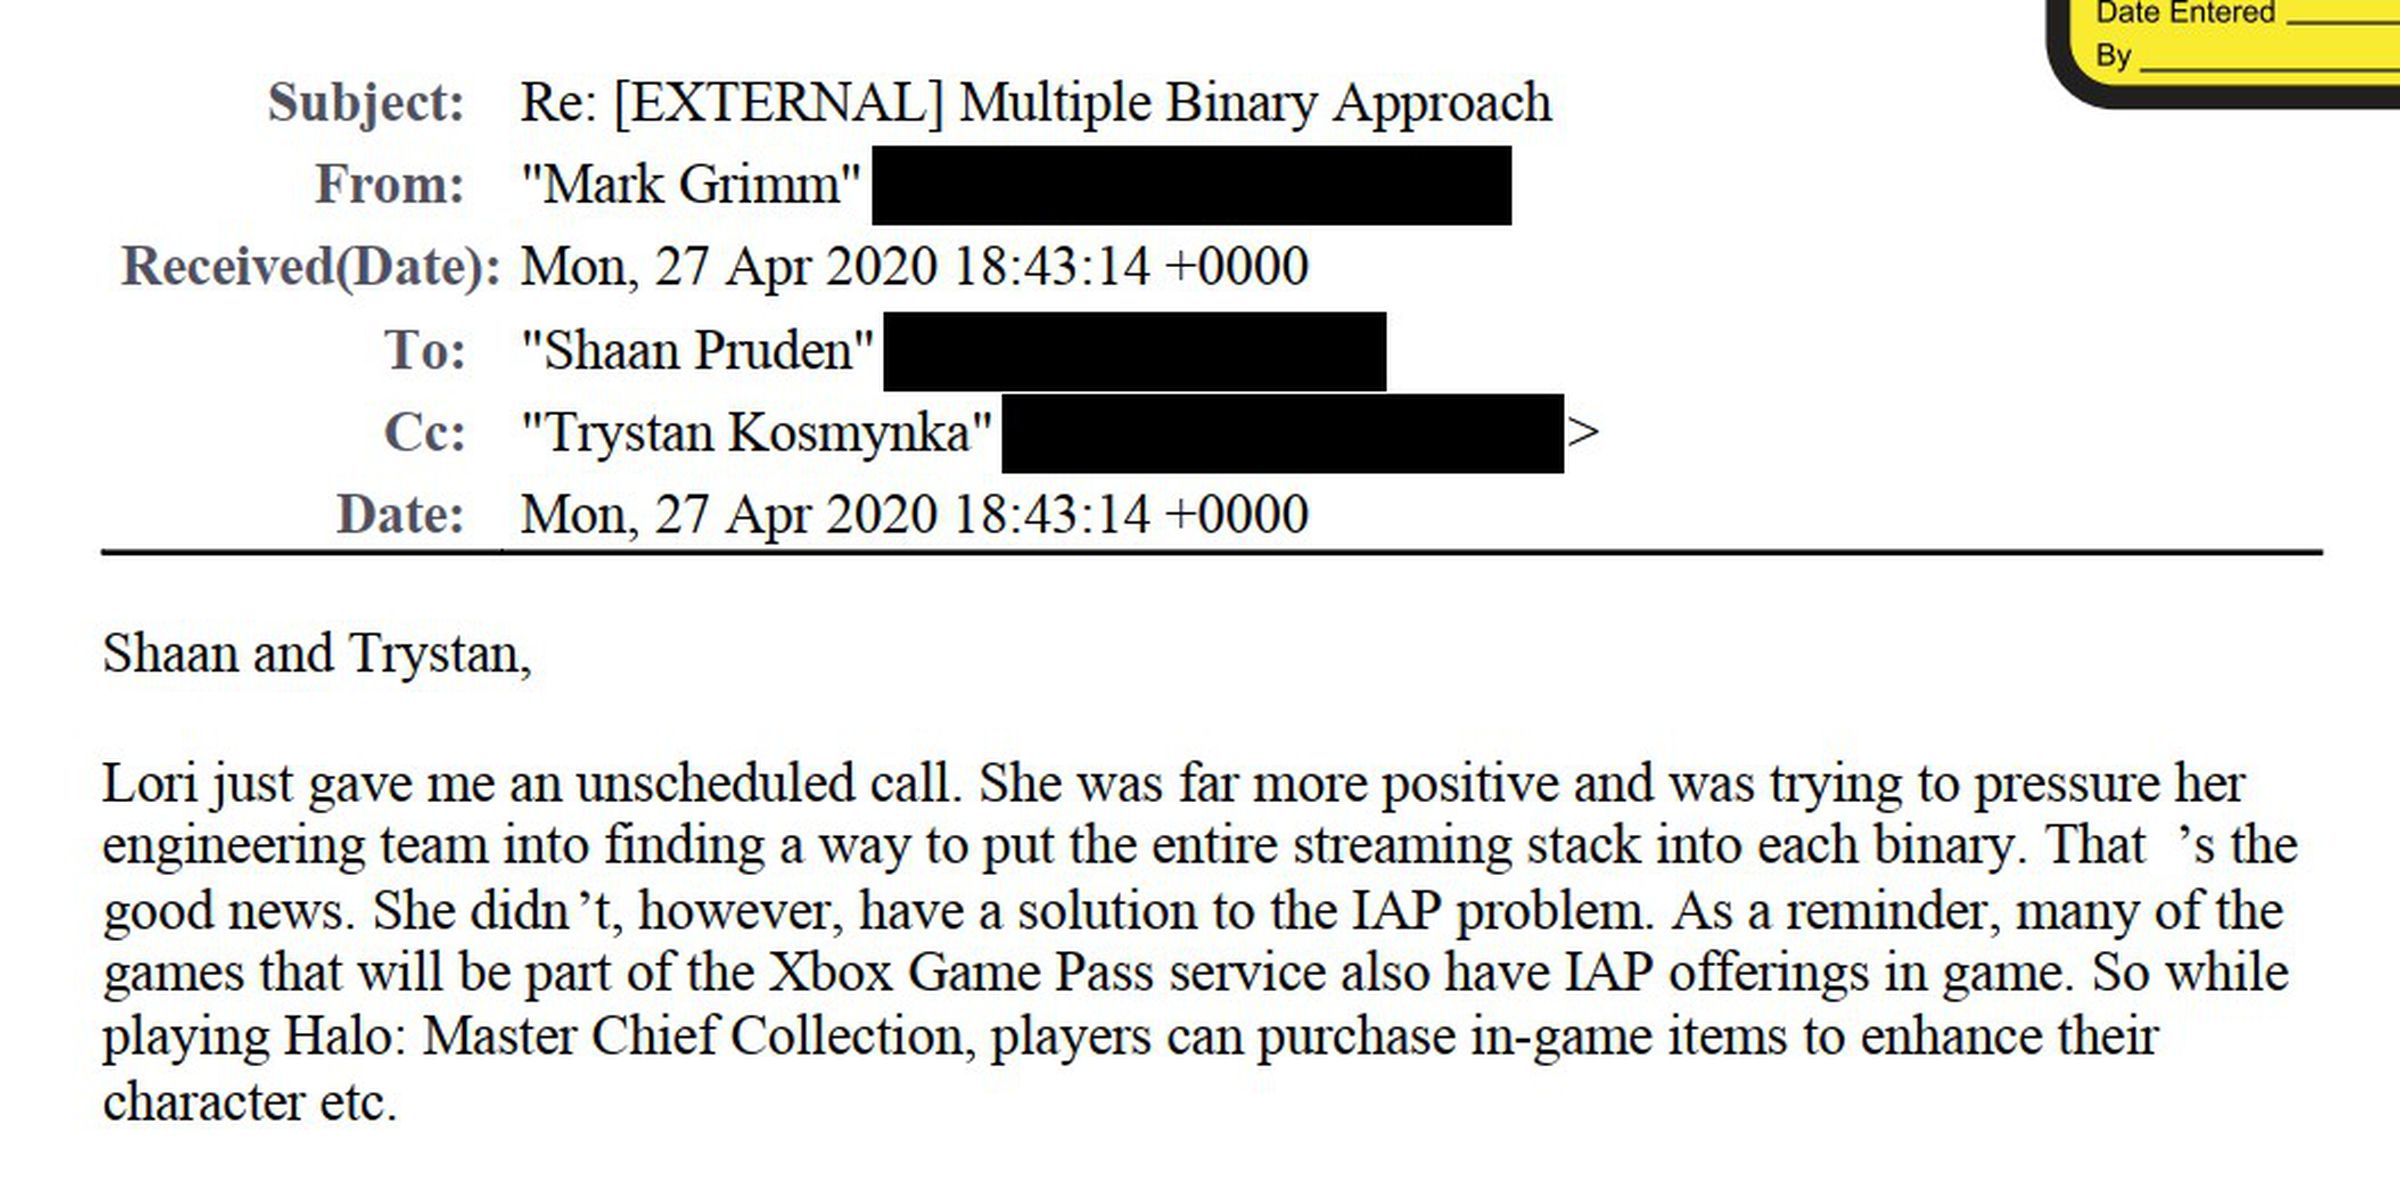 Grimm goes on to suggest that Apple’s agreed role in negotiations was to “take the IAP problem back and figure something out,” but it sounds like that didn’t happen.